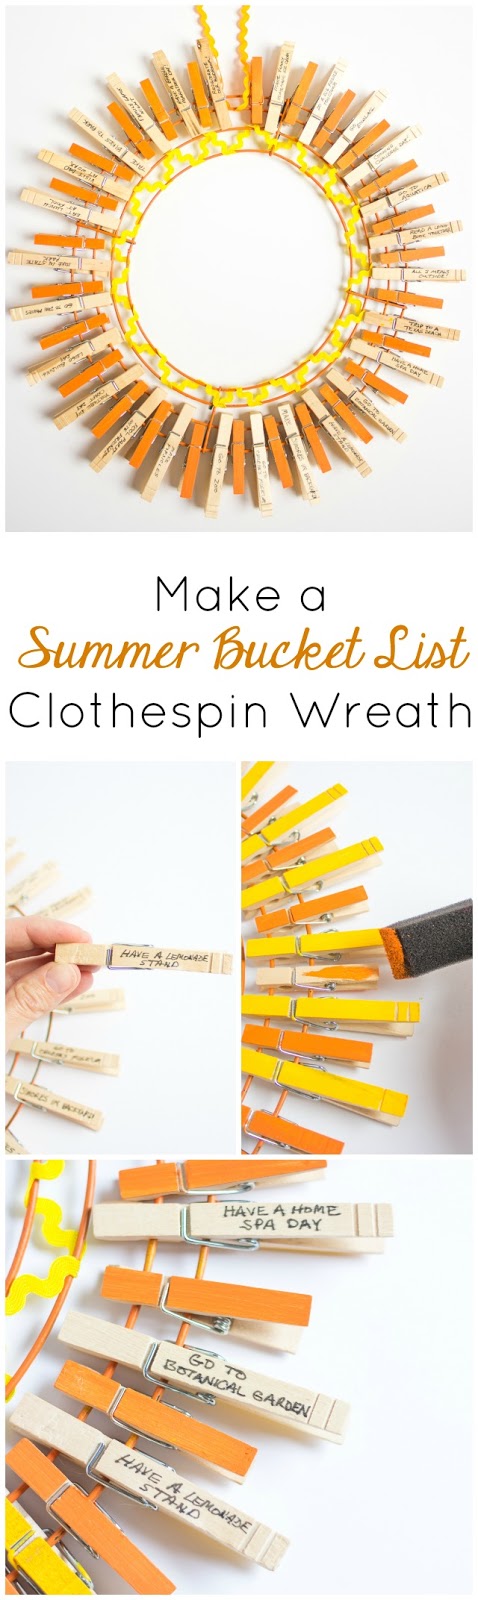 Make a summer bucket list wreath out of clothespins! It turns into a sunshine when you have crossed everything off your list!